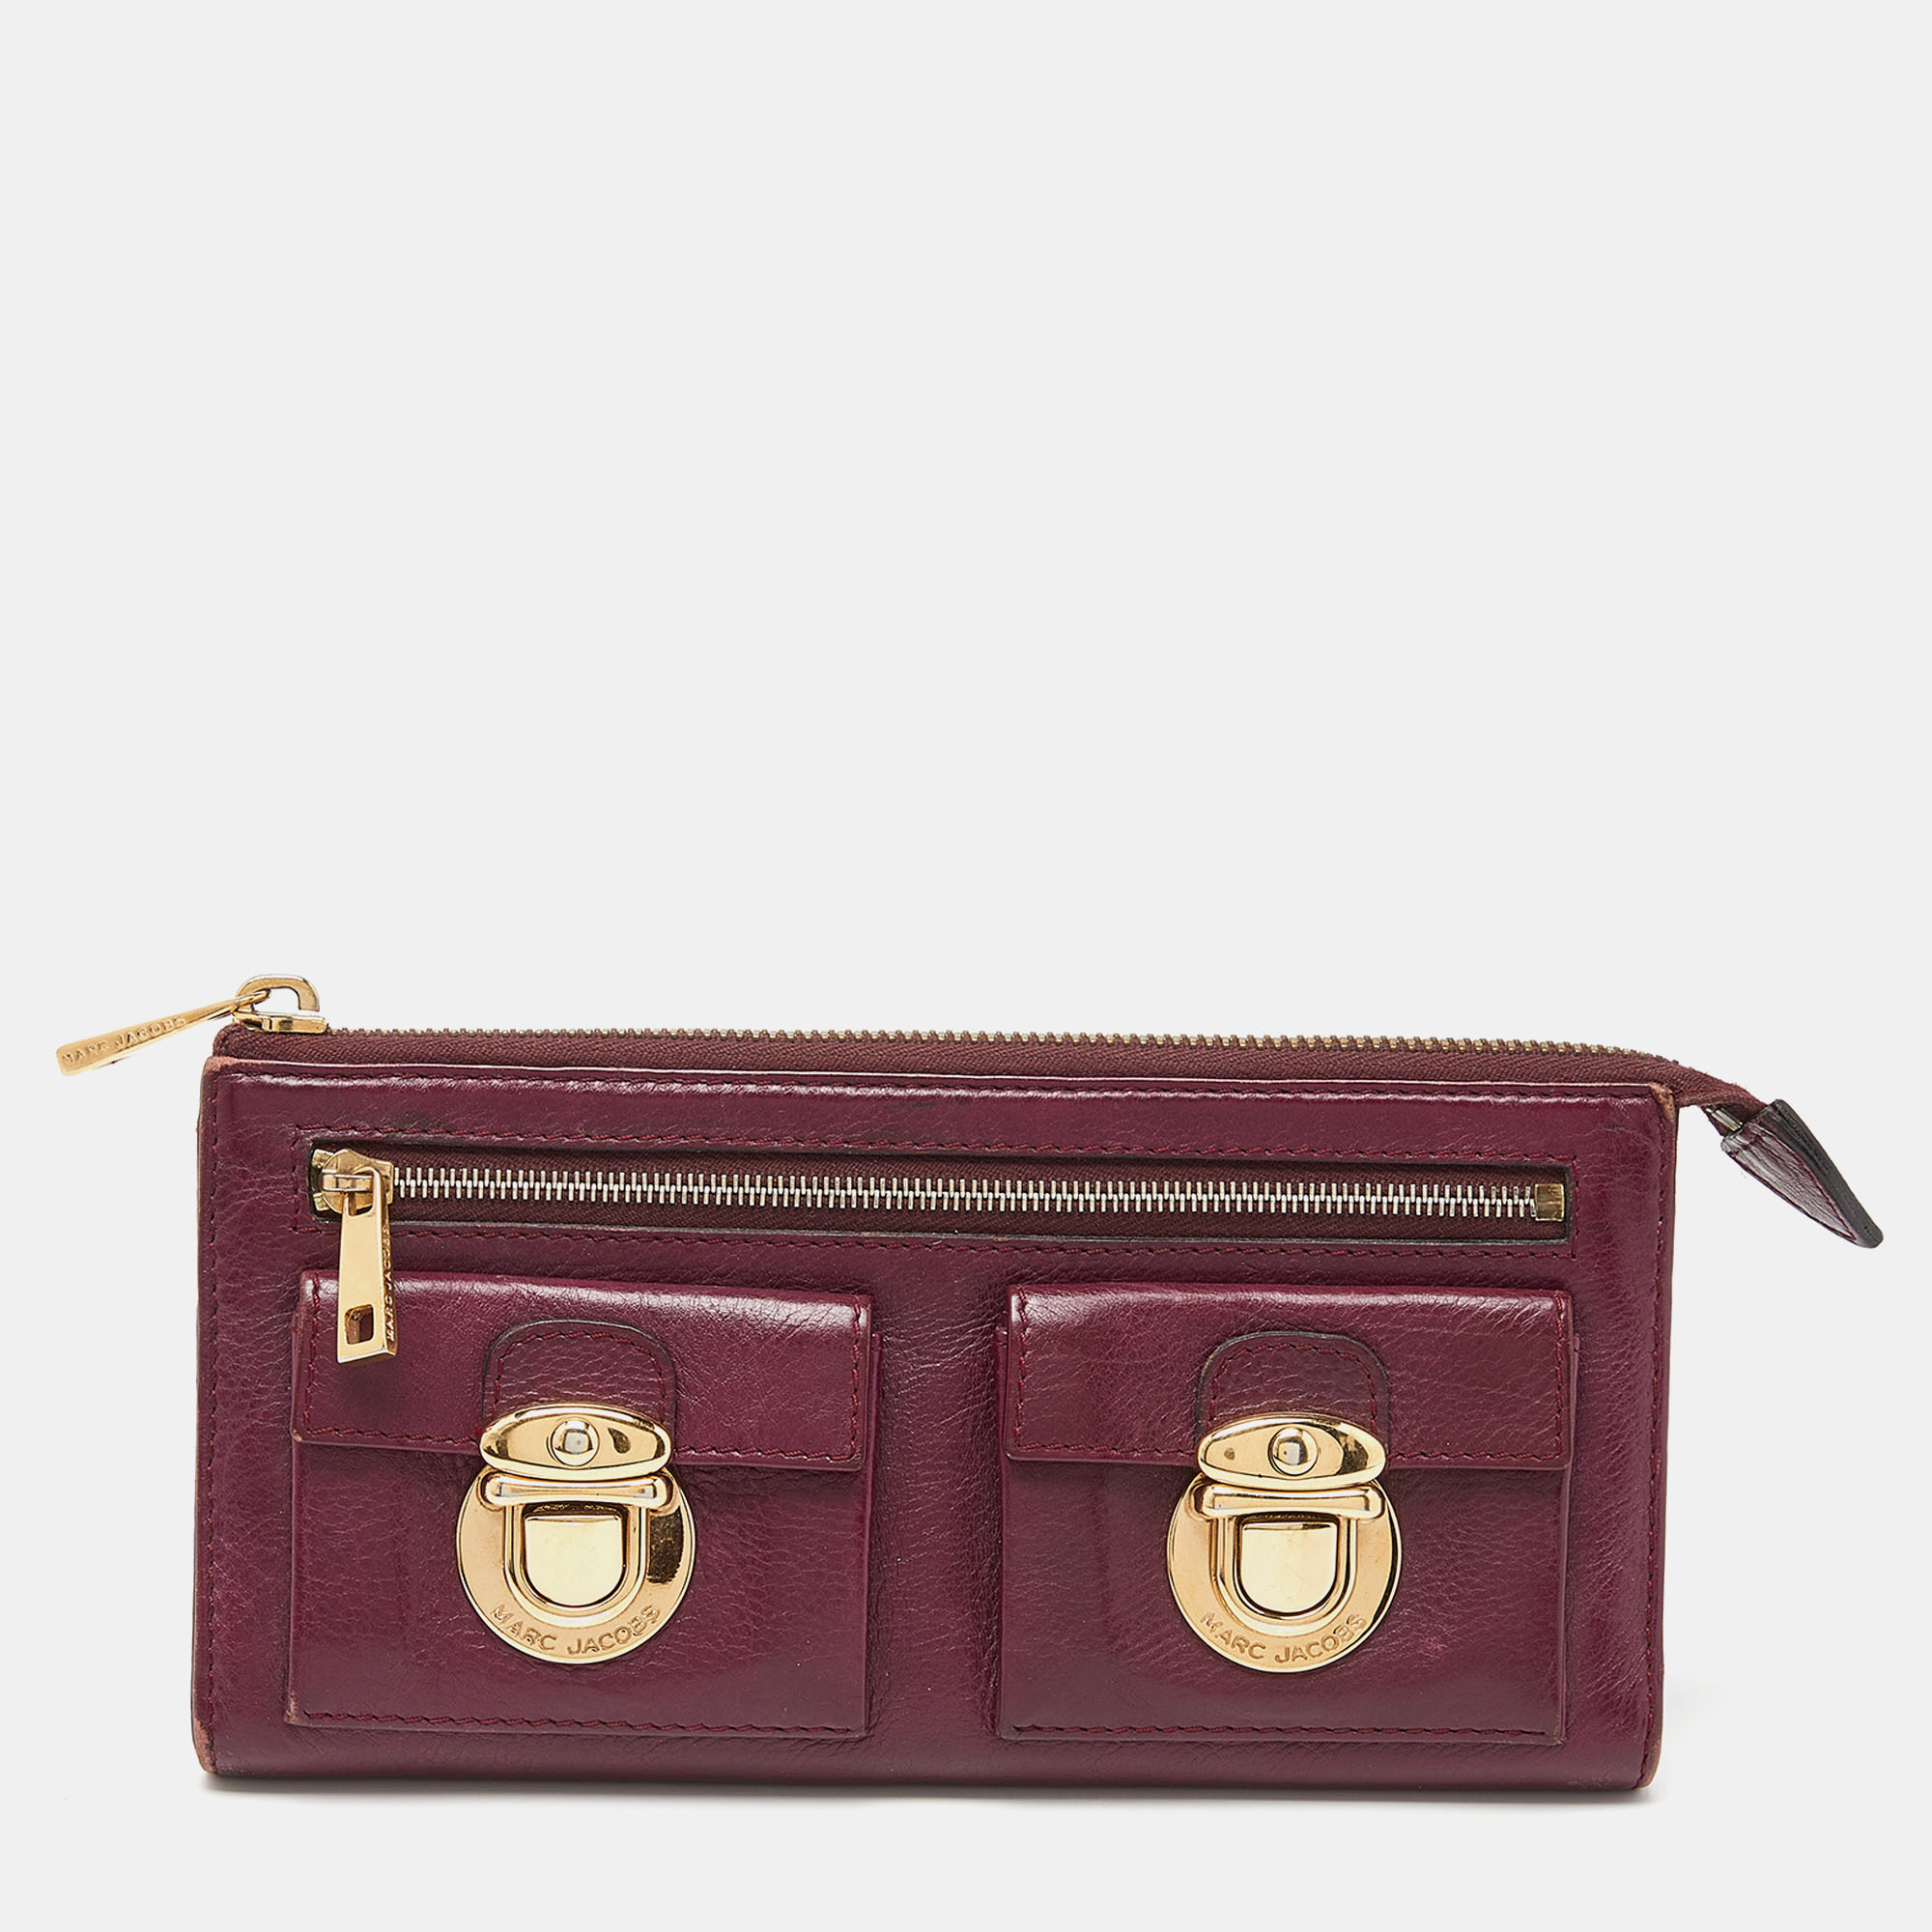 Marc jacobs magenta leather zip continental wallet